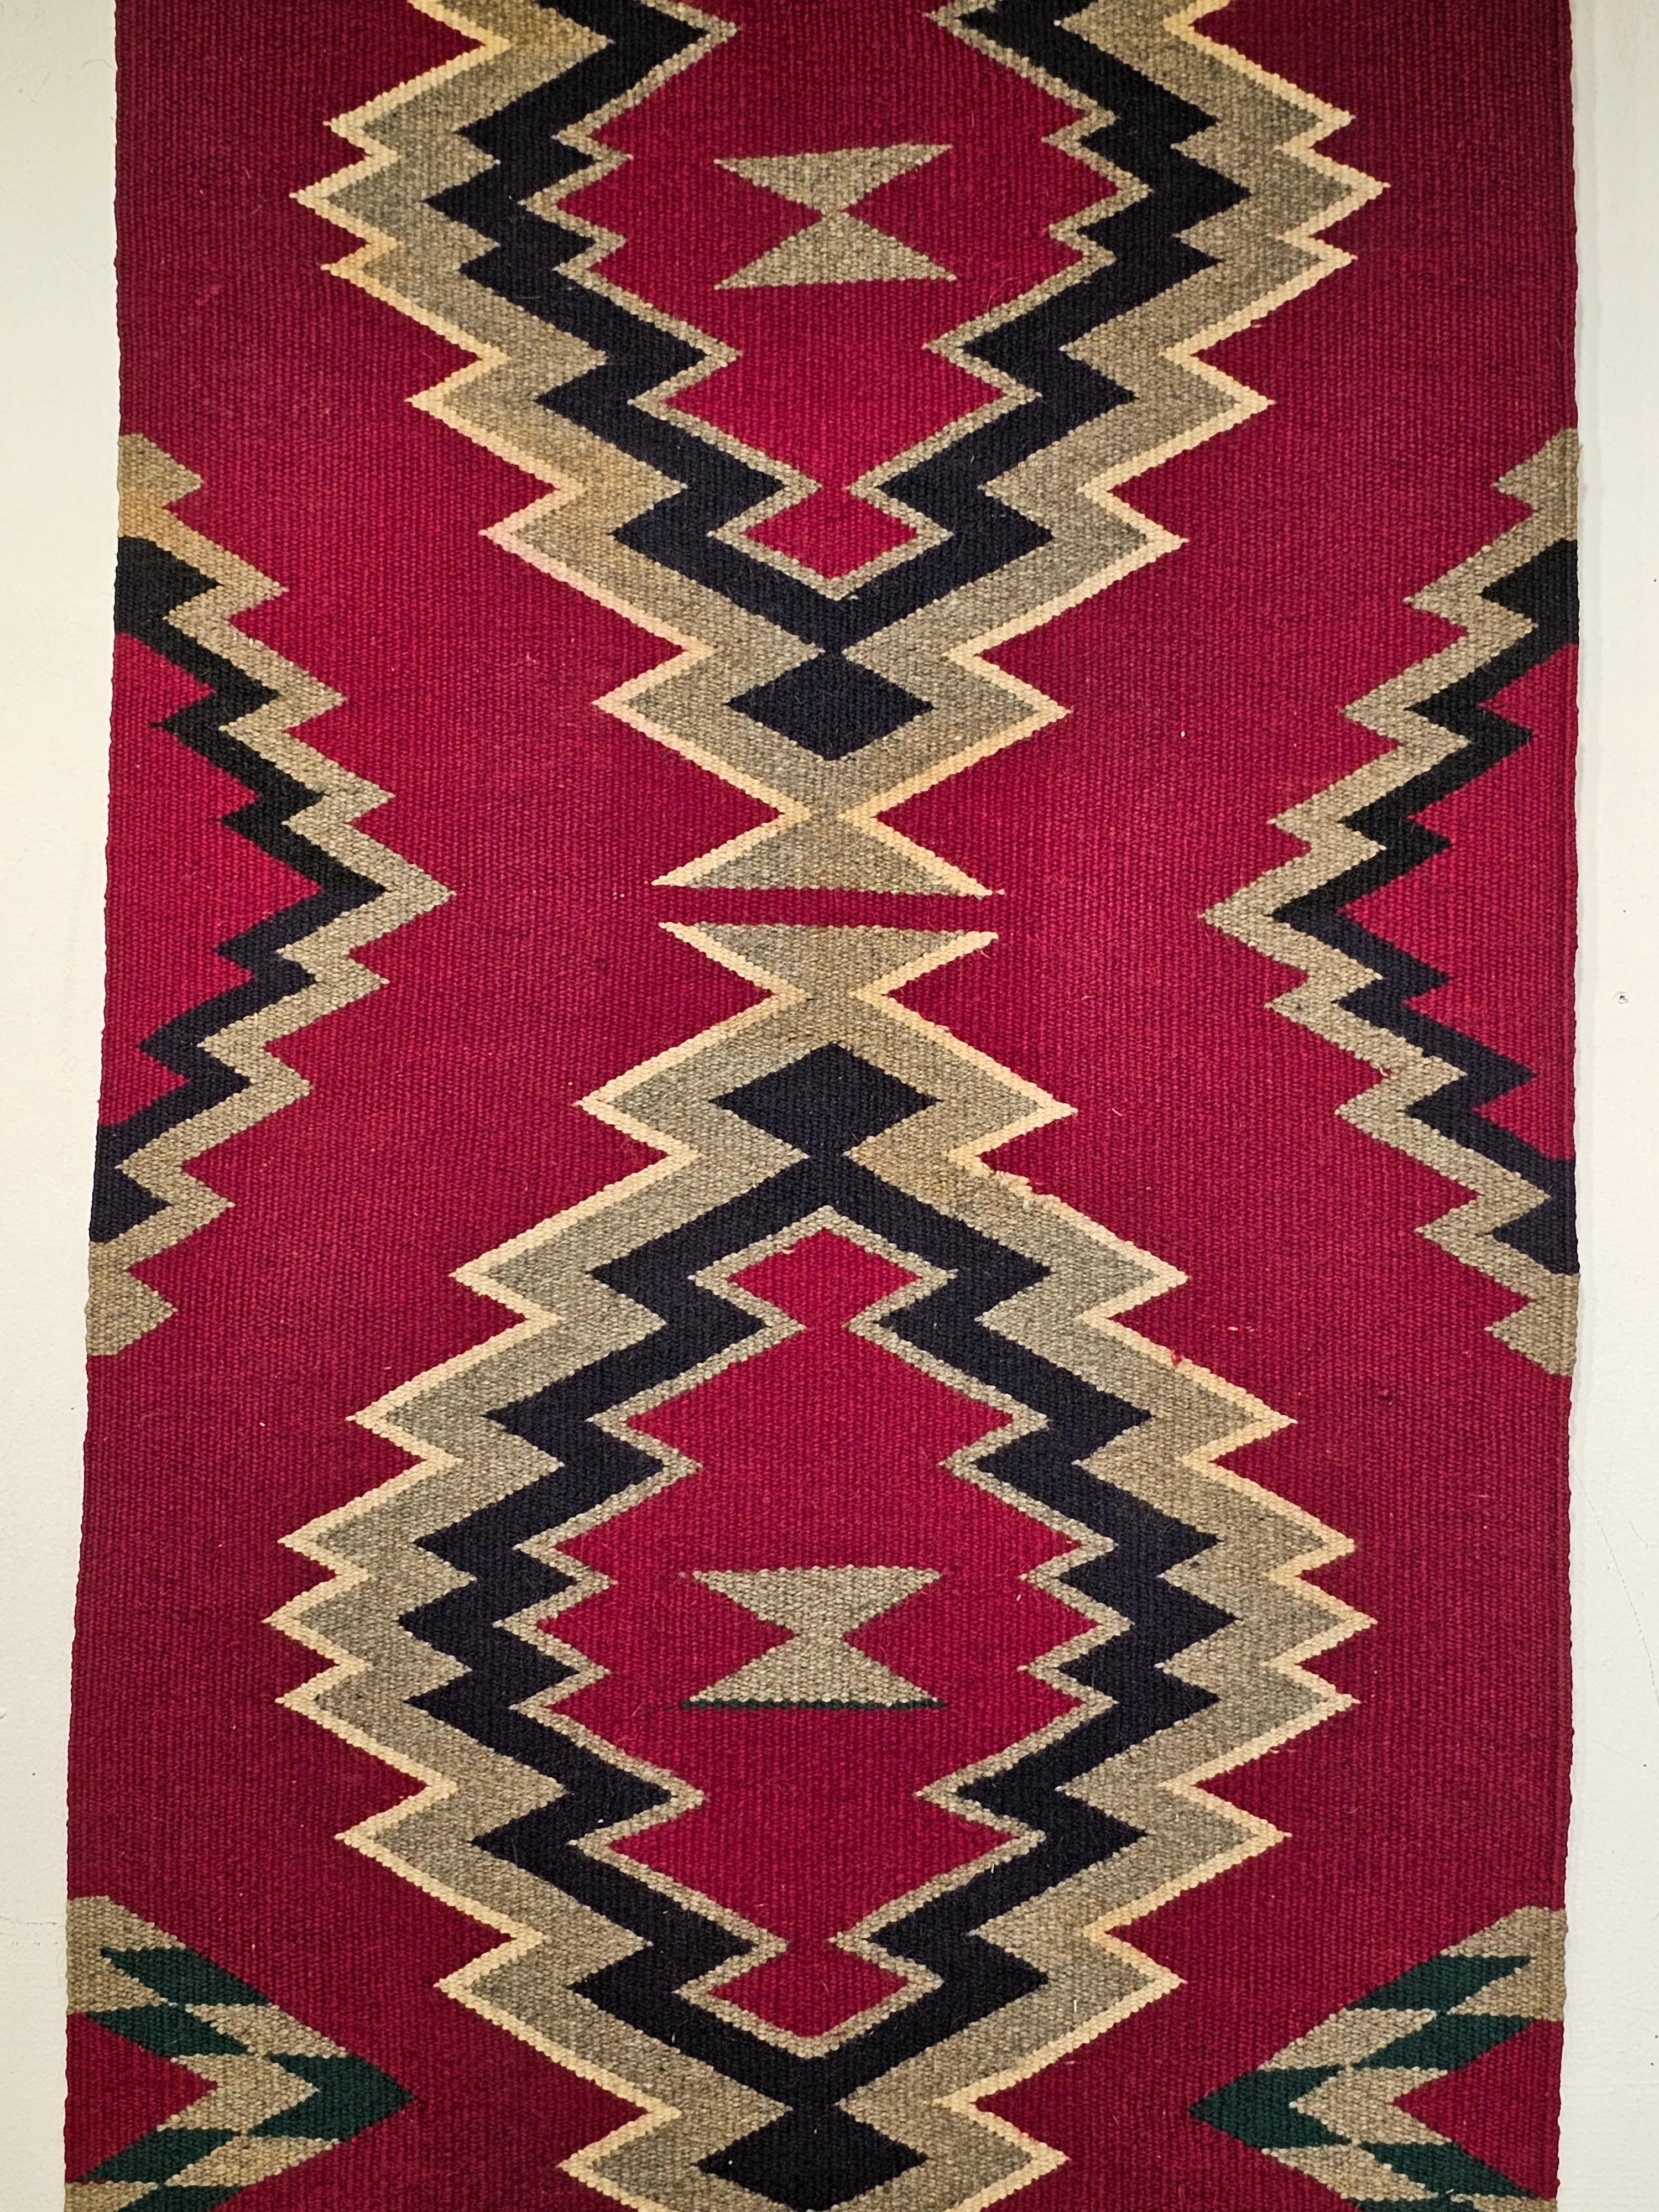 Beautiful vintage native American Navajo rug from the SW United States from the mid 1900s.    The Navajo rug has an eye dazzler medallion pattern.  The rug has a beautiful maroon-red background with two medallions in ivory, black, gray colors.  
